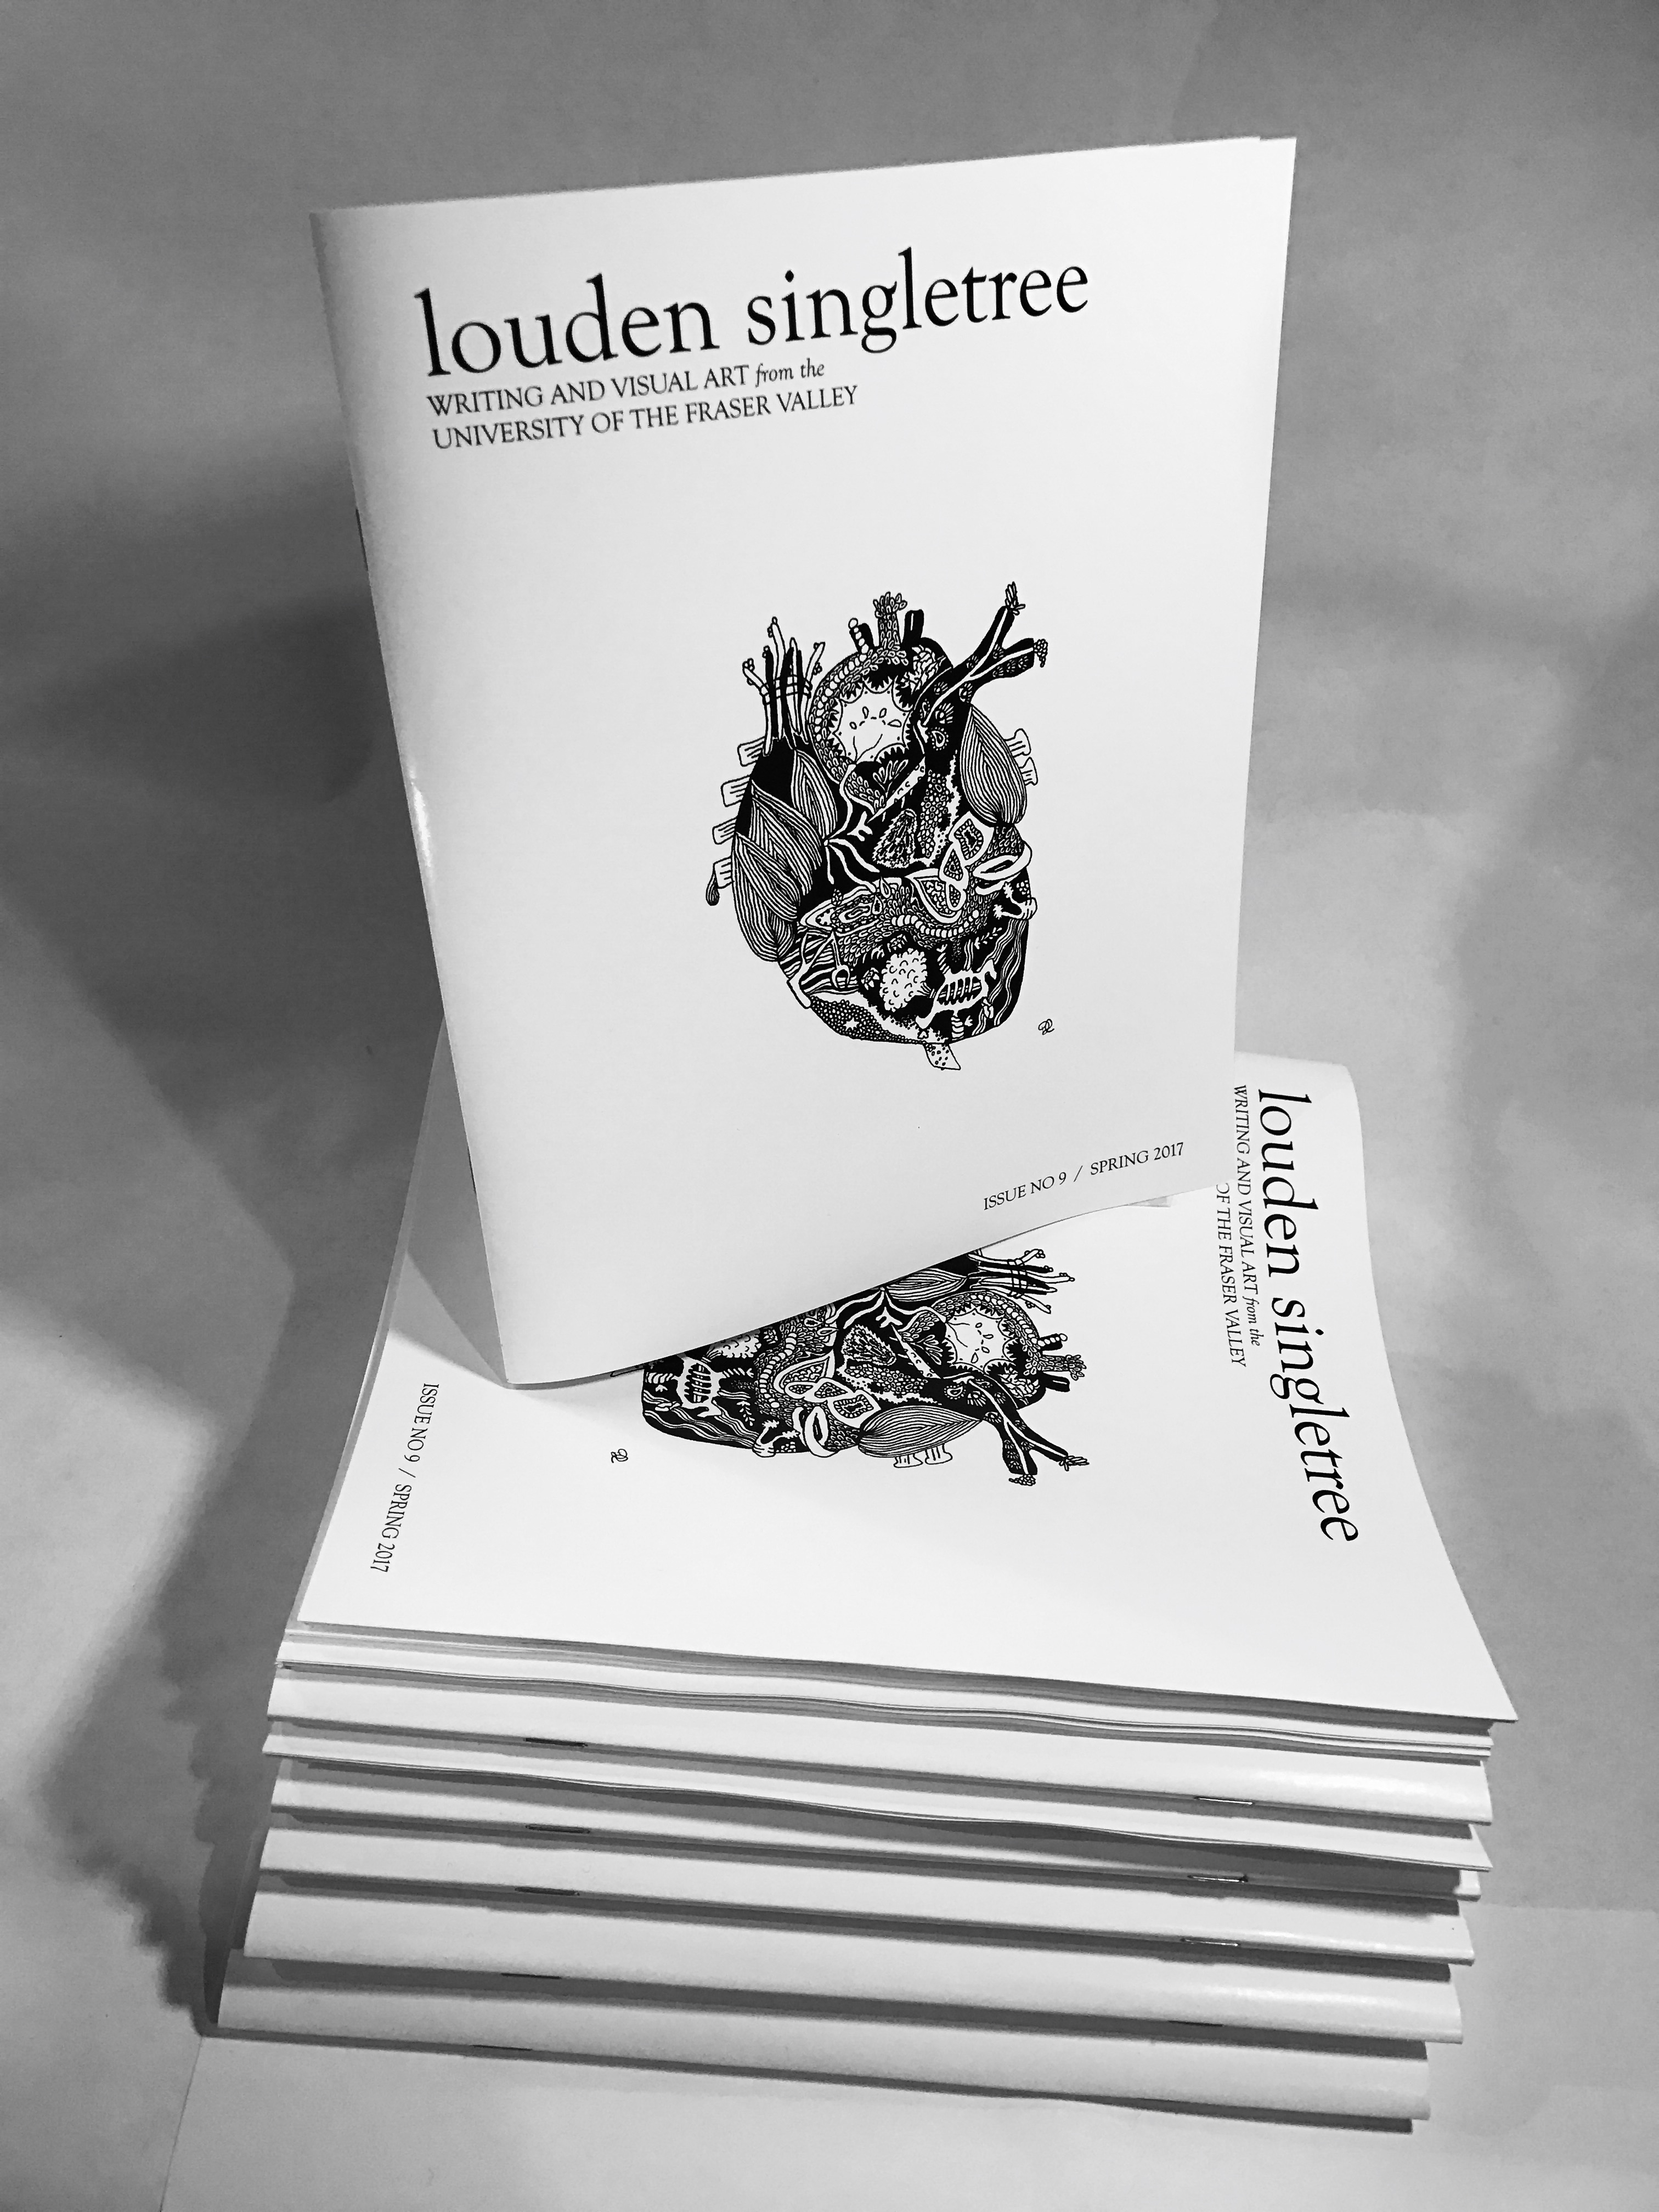 Celebrate UFV’s artists at the Louden Singletree launch party